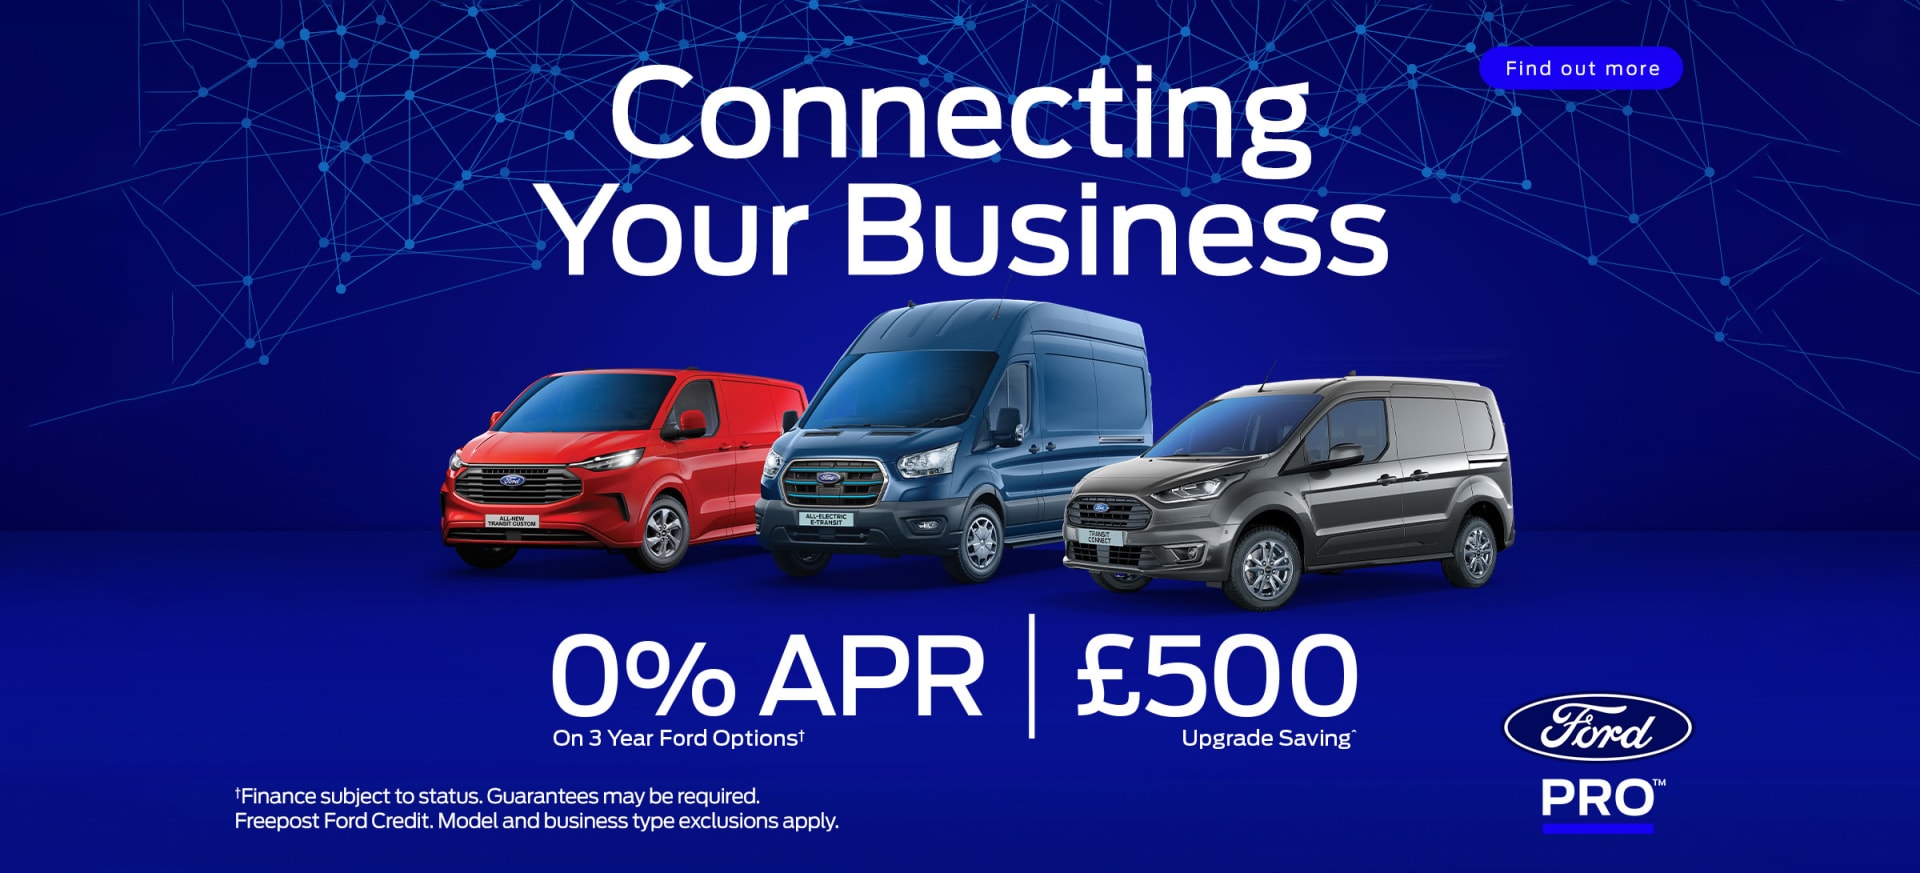 ford transit connecting your business